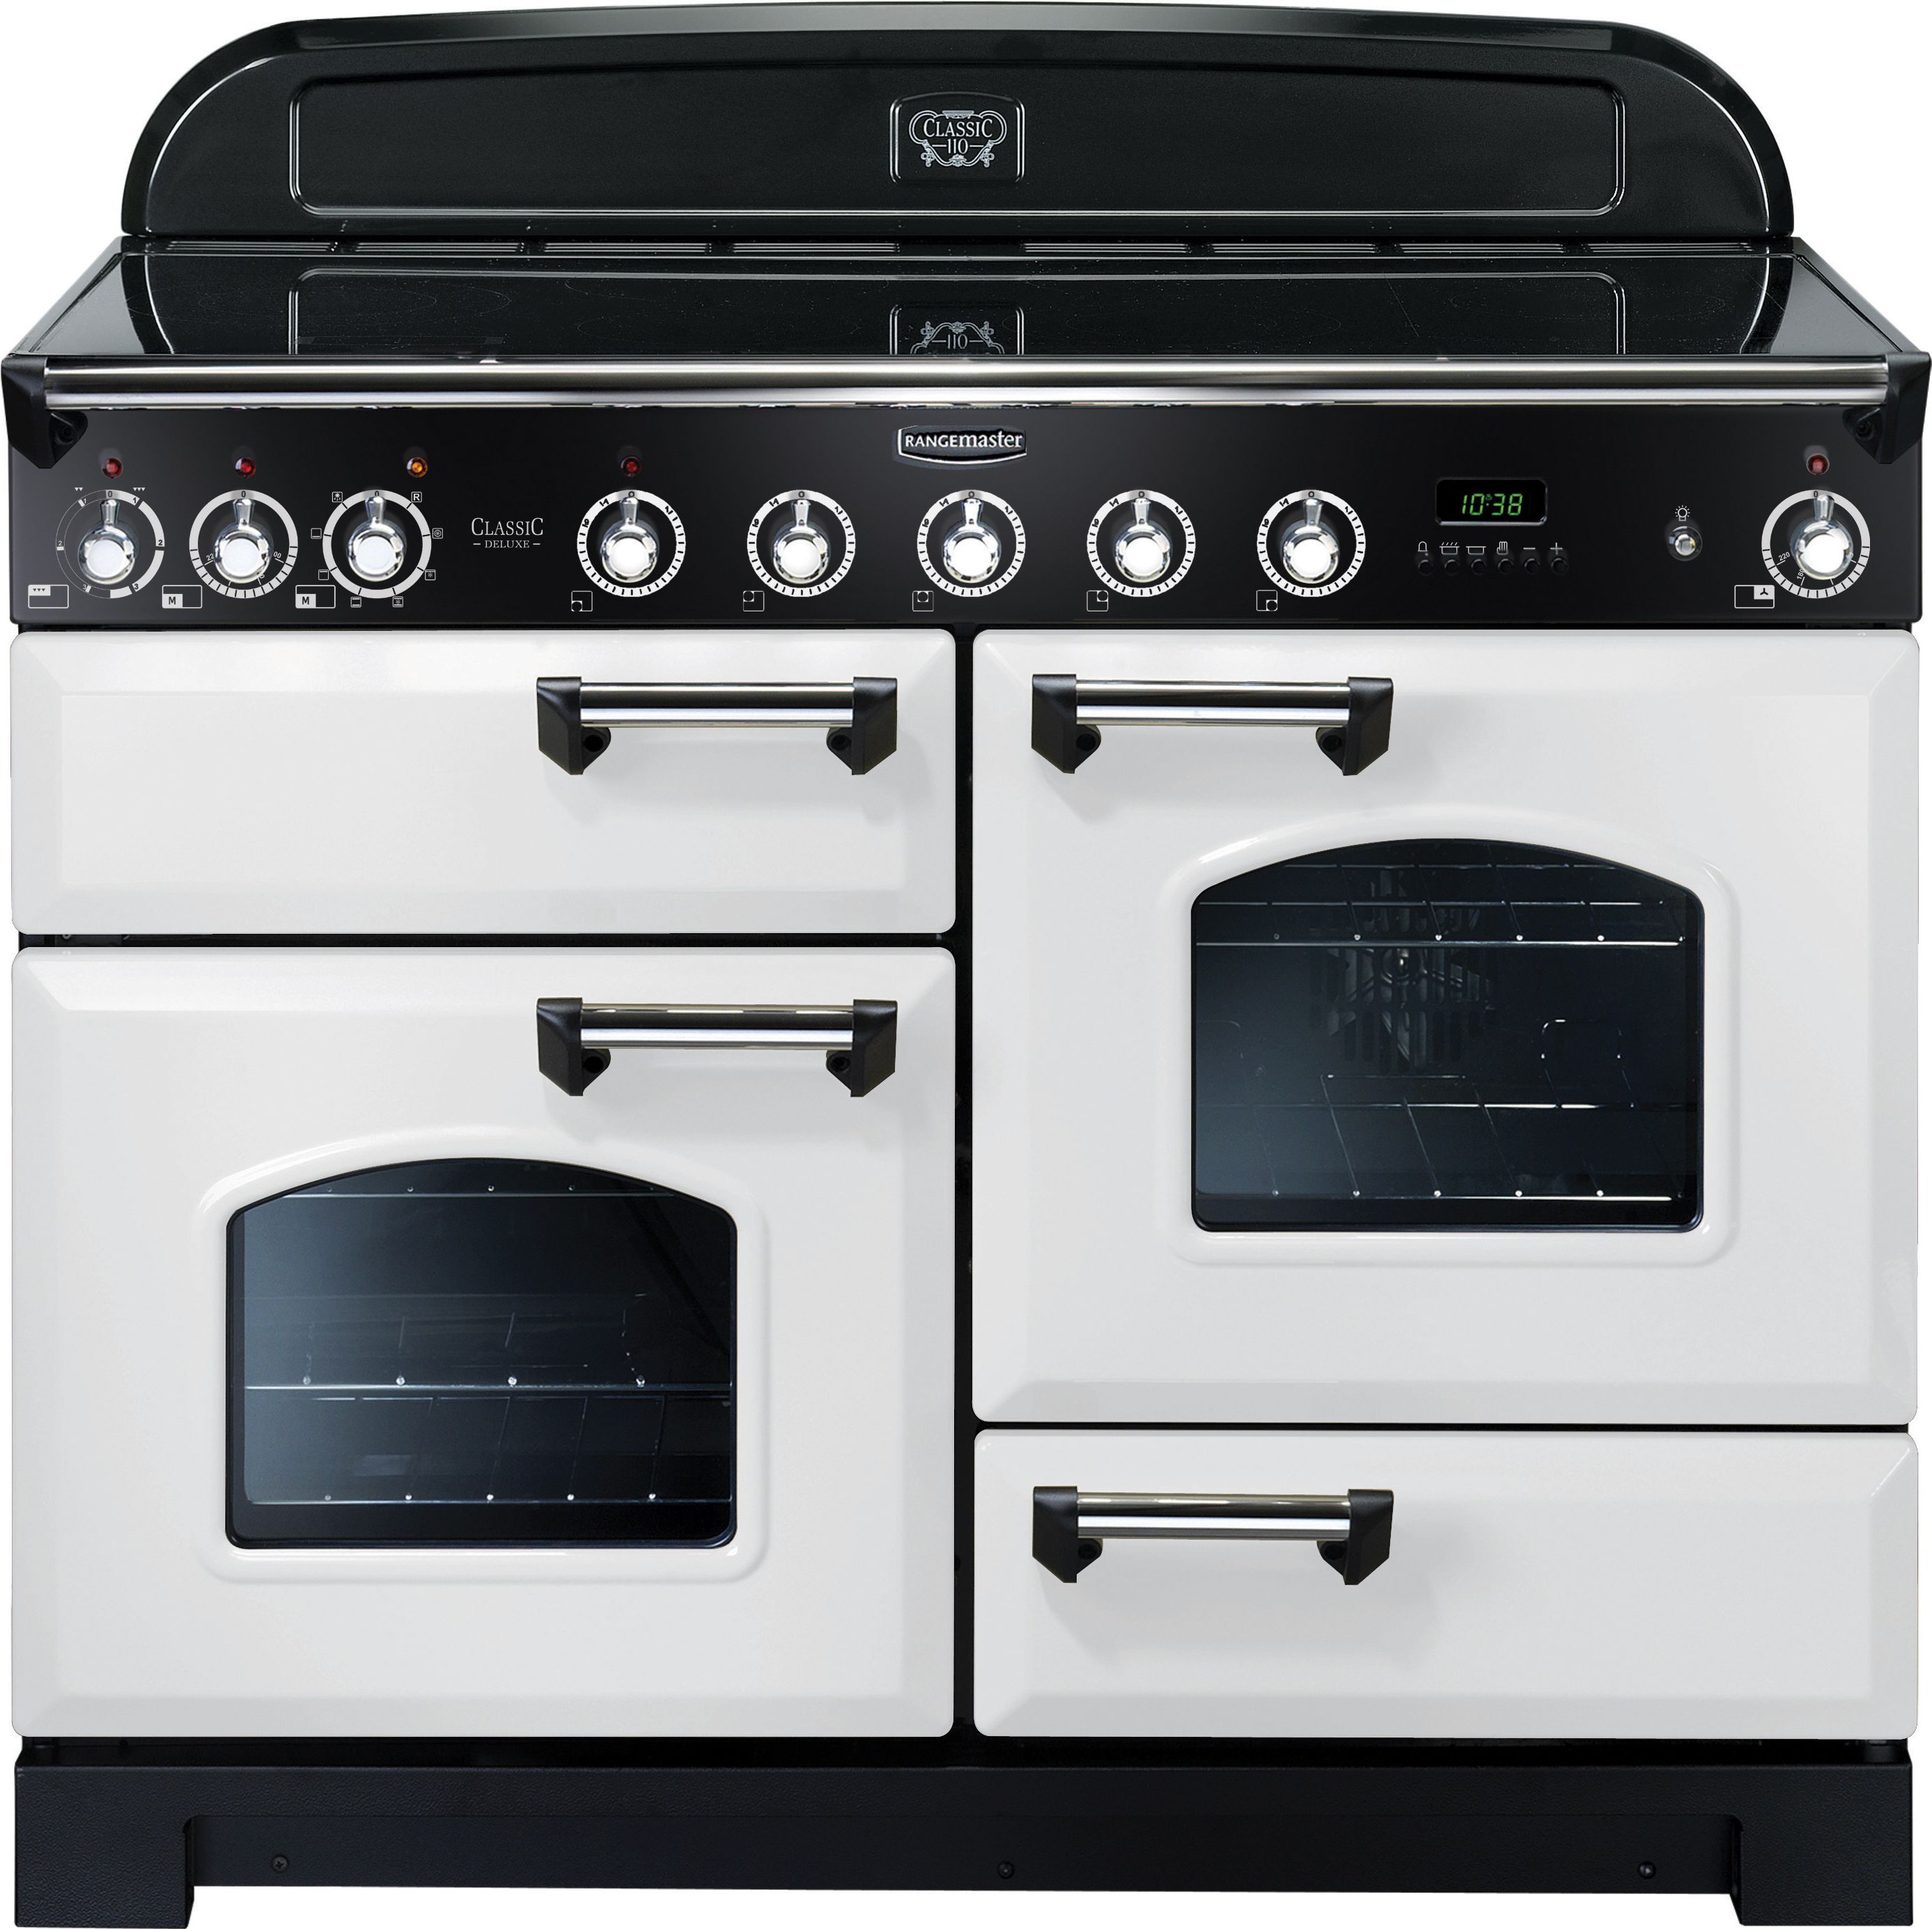 Rangemaster Classic Deluxe CDL110EIWH/C 110cm Electric Range Cooker with Induction Hob - White / Chrome - A/A Rated, White